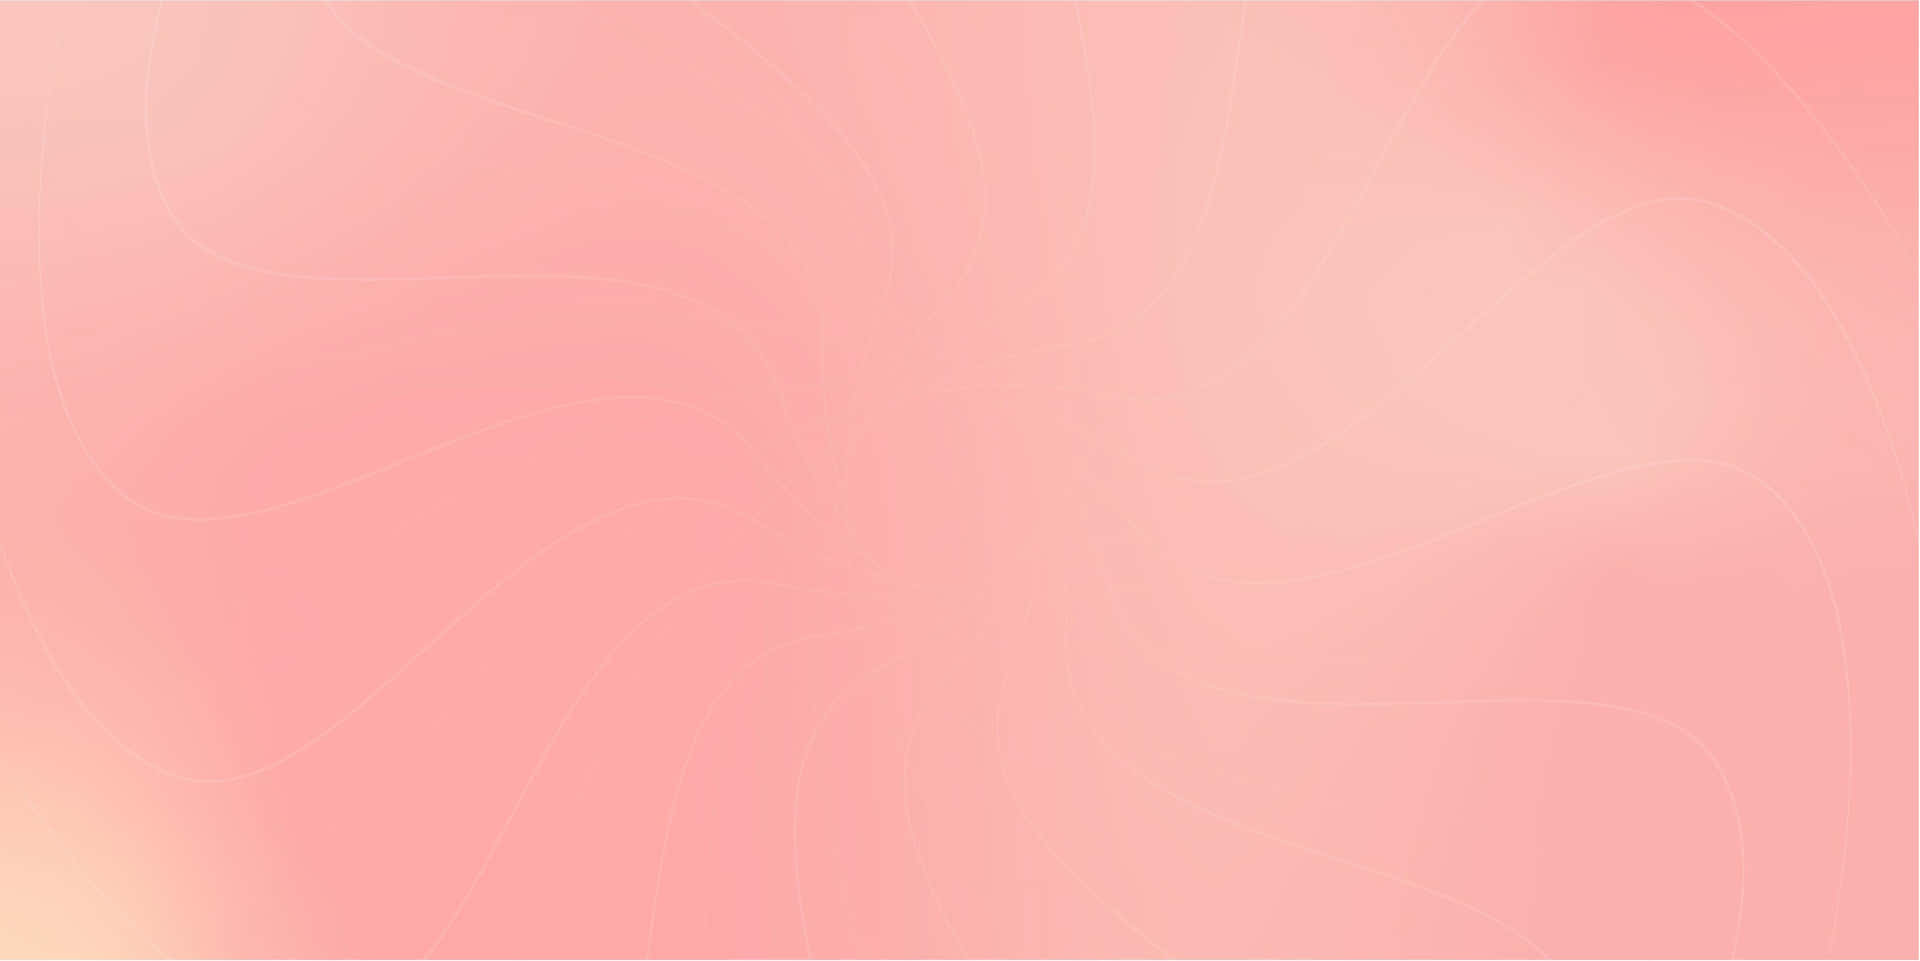 Soft Pink Ombre Background Wallpaper